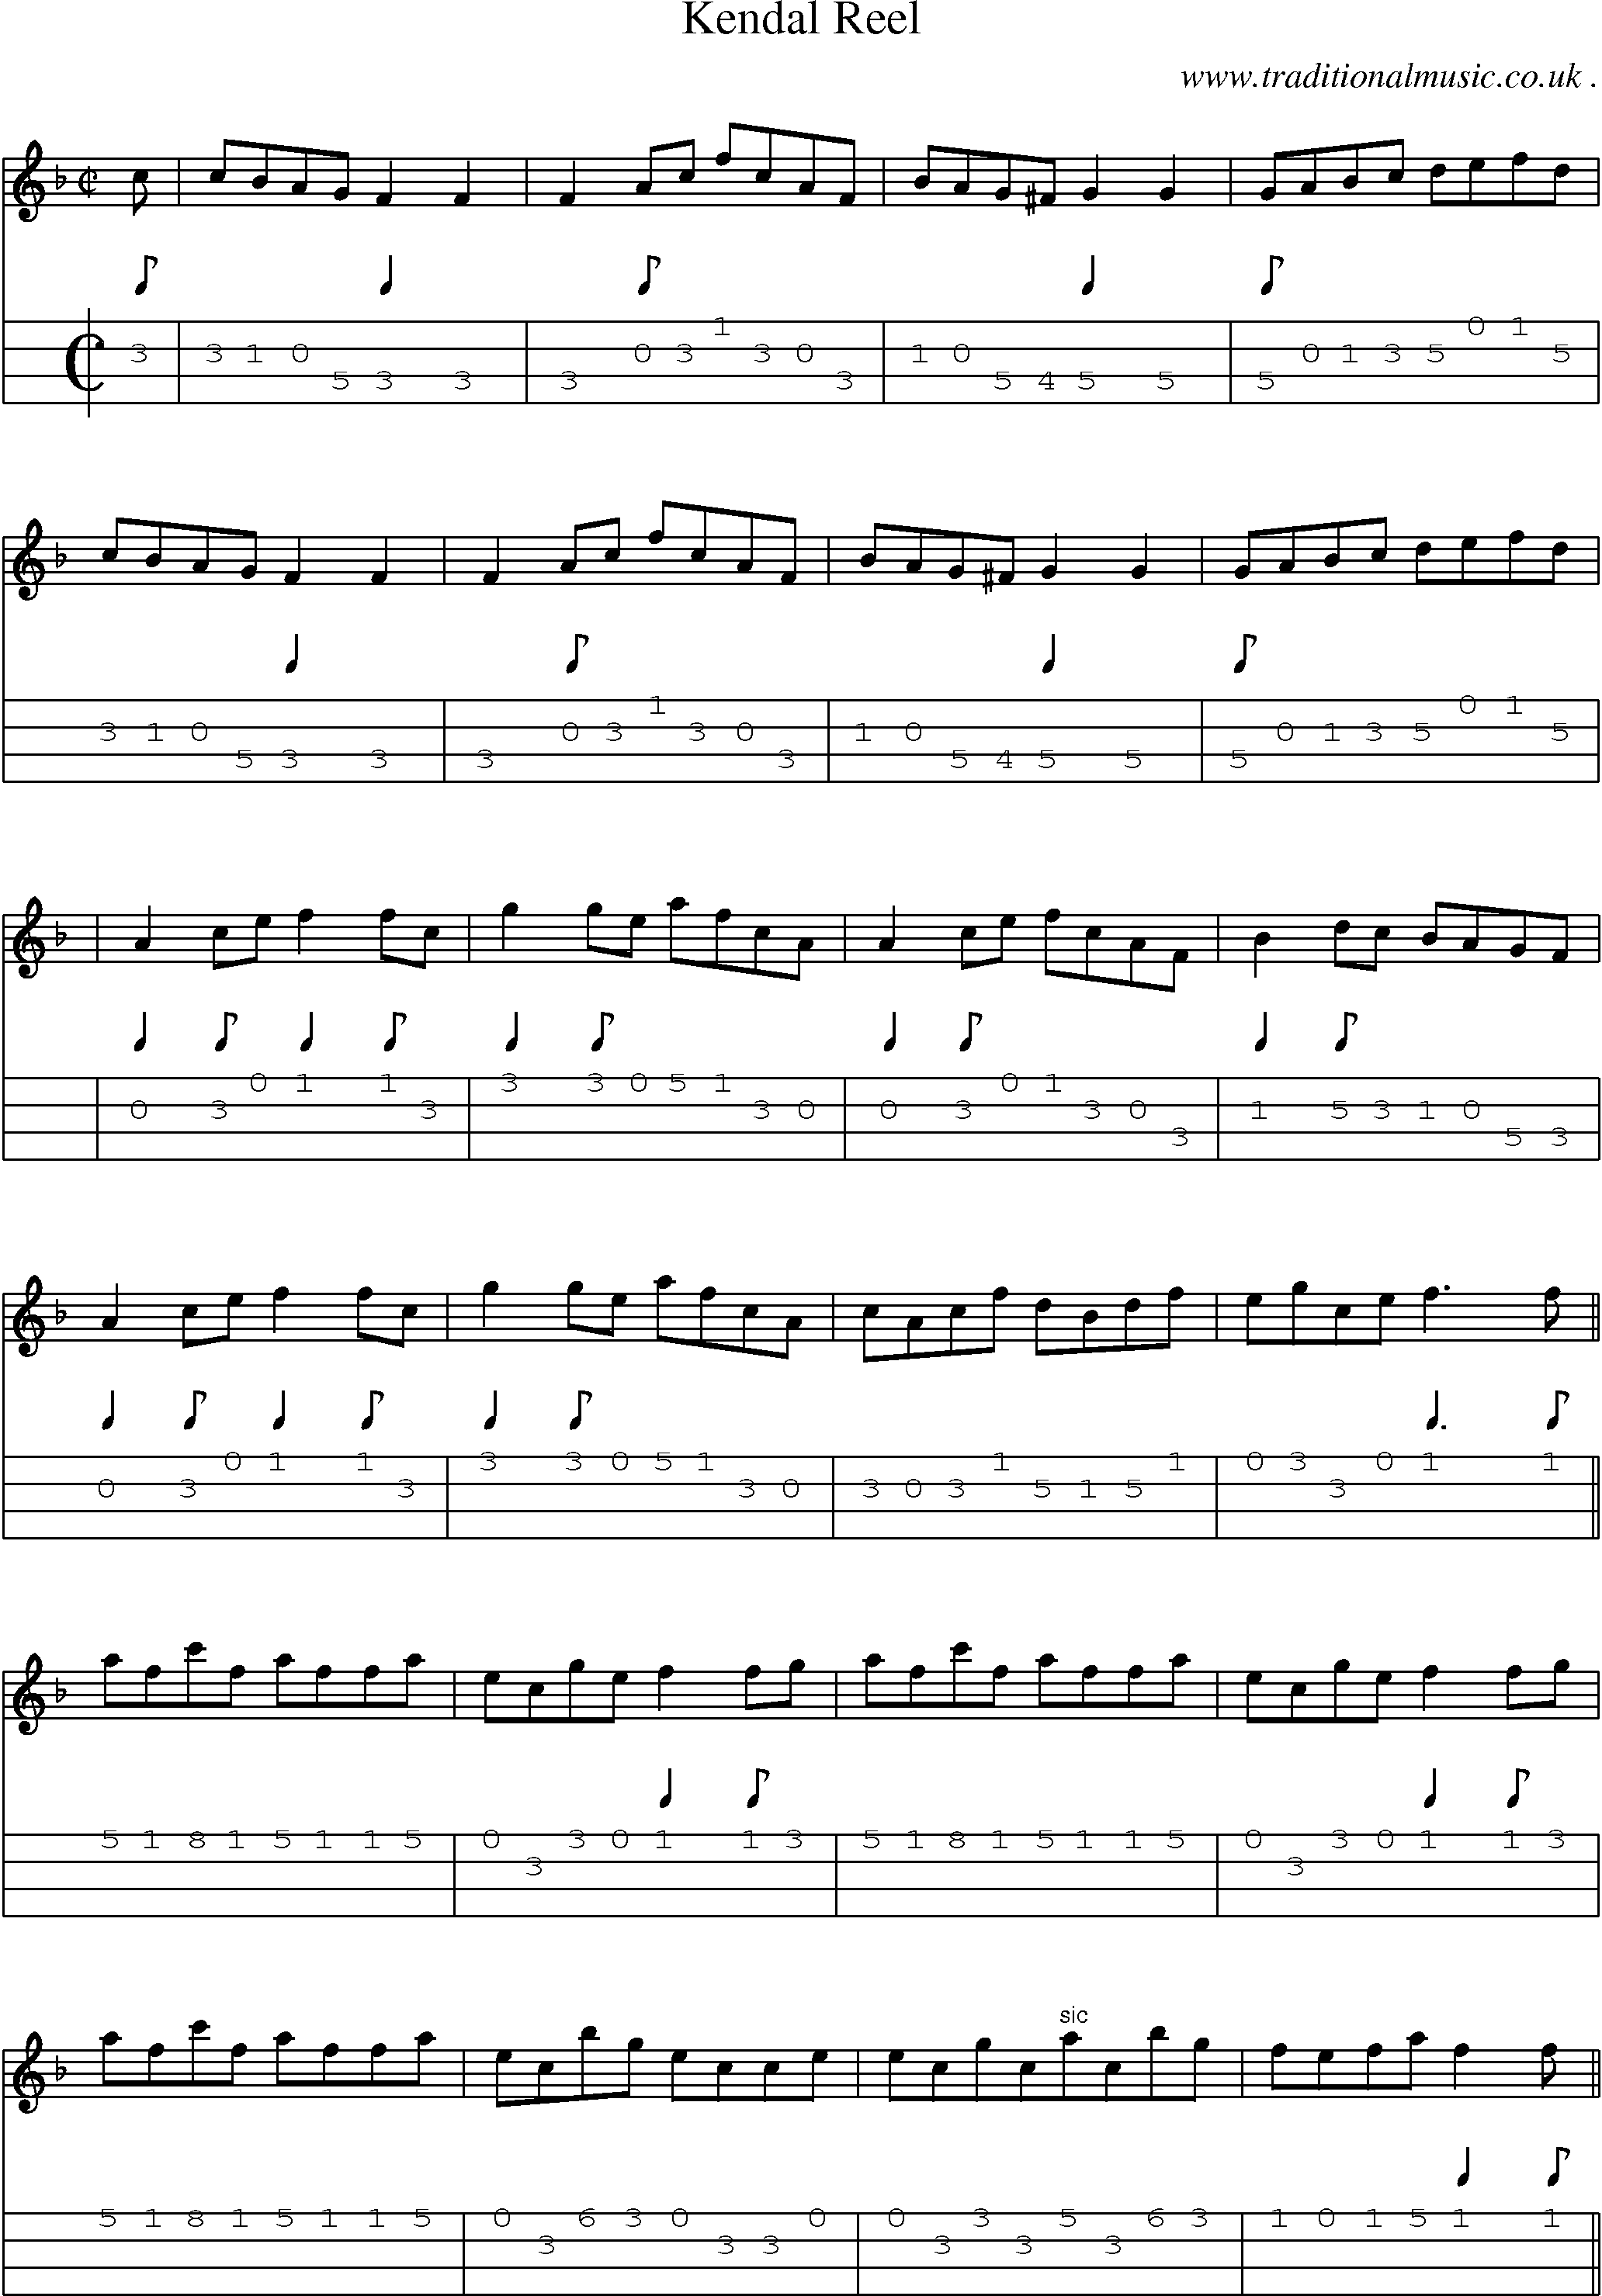 Sheet-Music and Mandolin Tabs for Kendal Reel